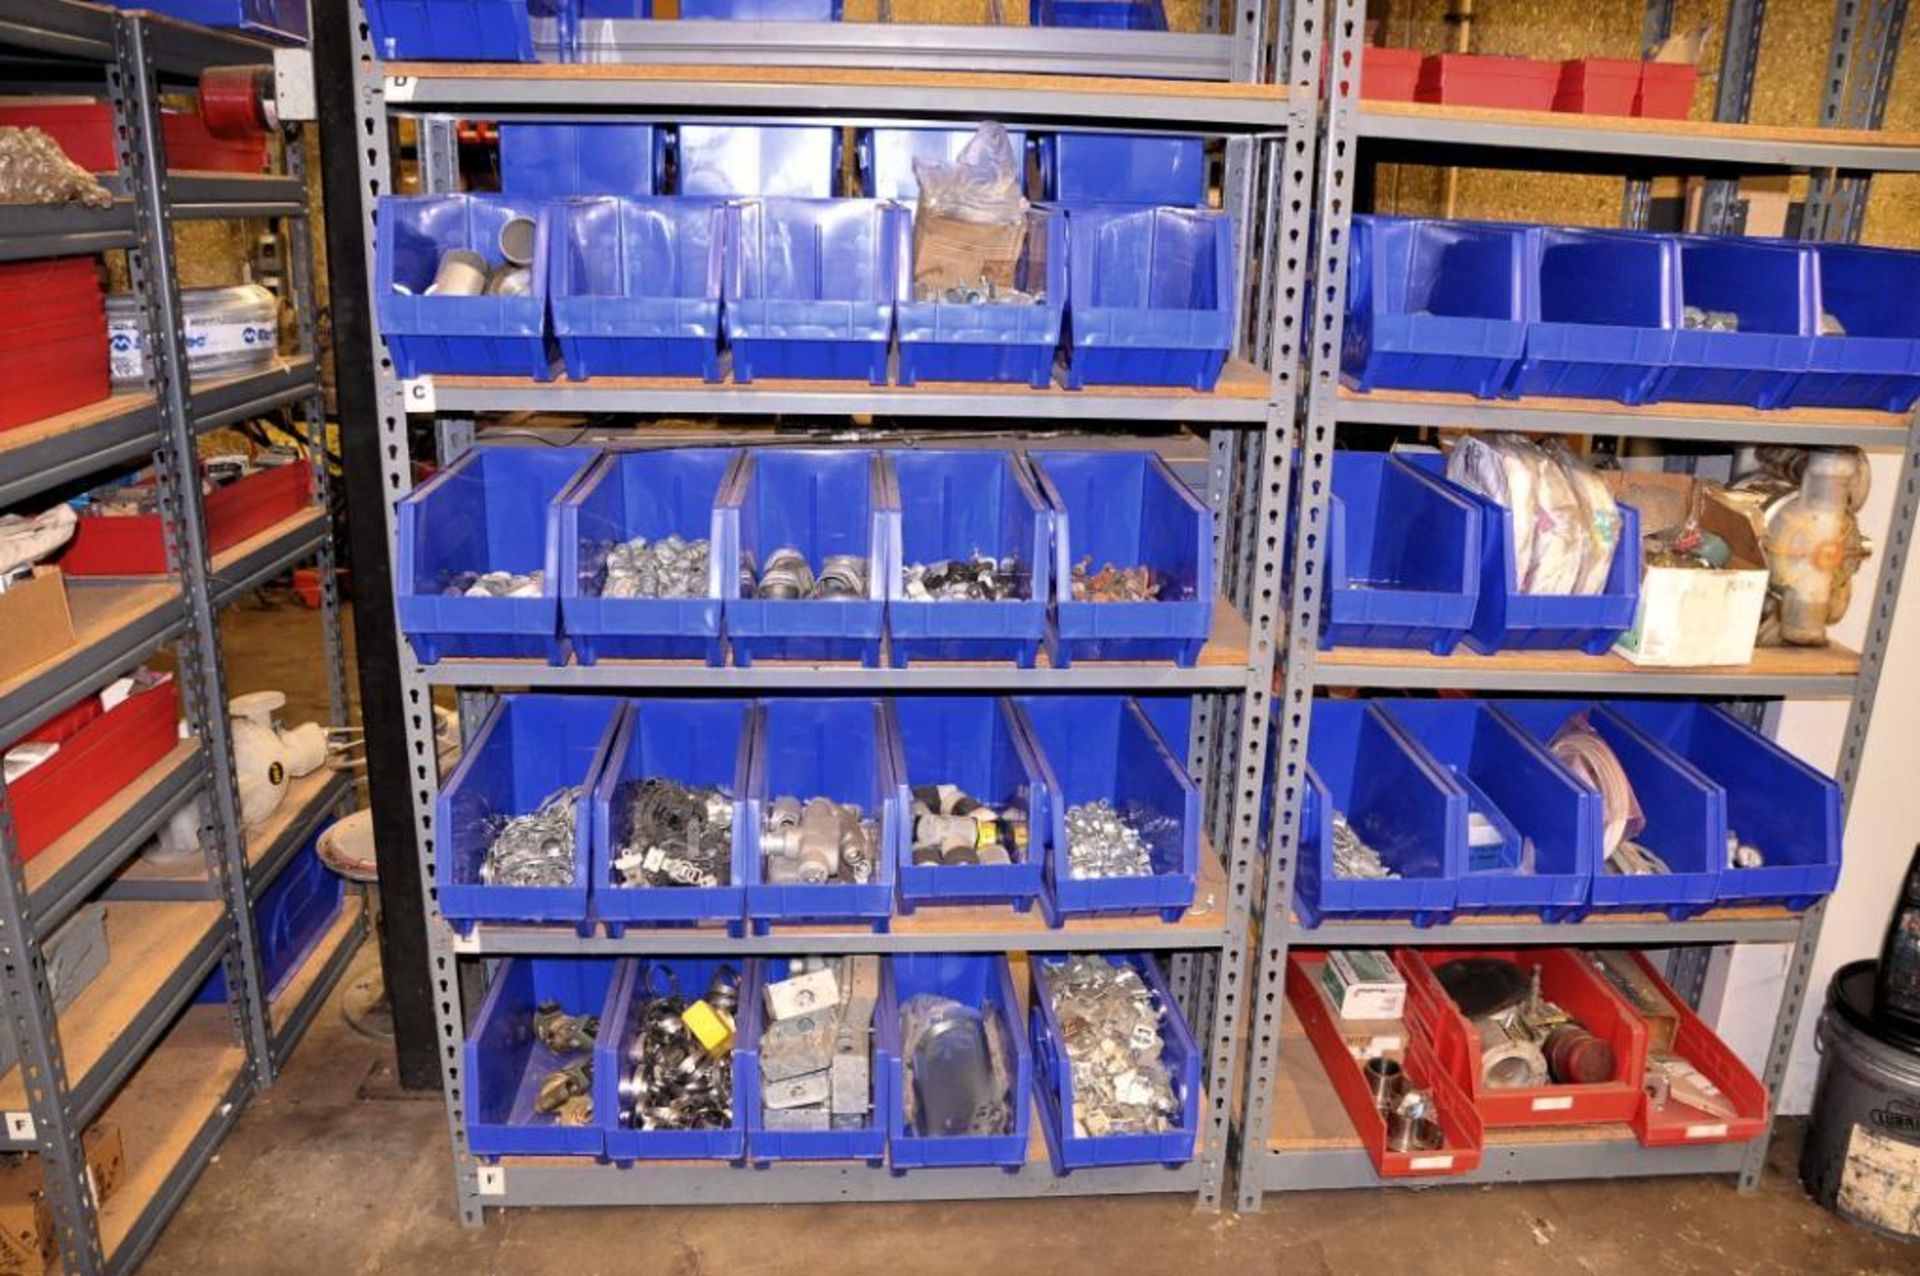 Lot - (8) Sections of Shelving with Diaphragm Pumps, Valves, Electronic Machine Parts, Pipe Fittings - Image 7 of 7